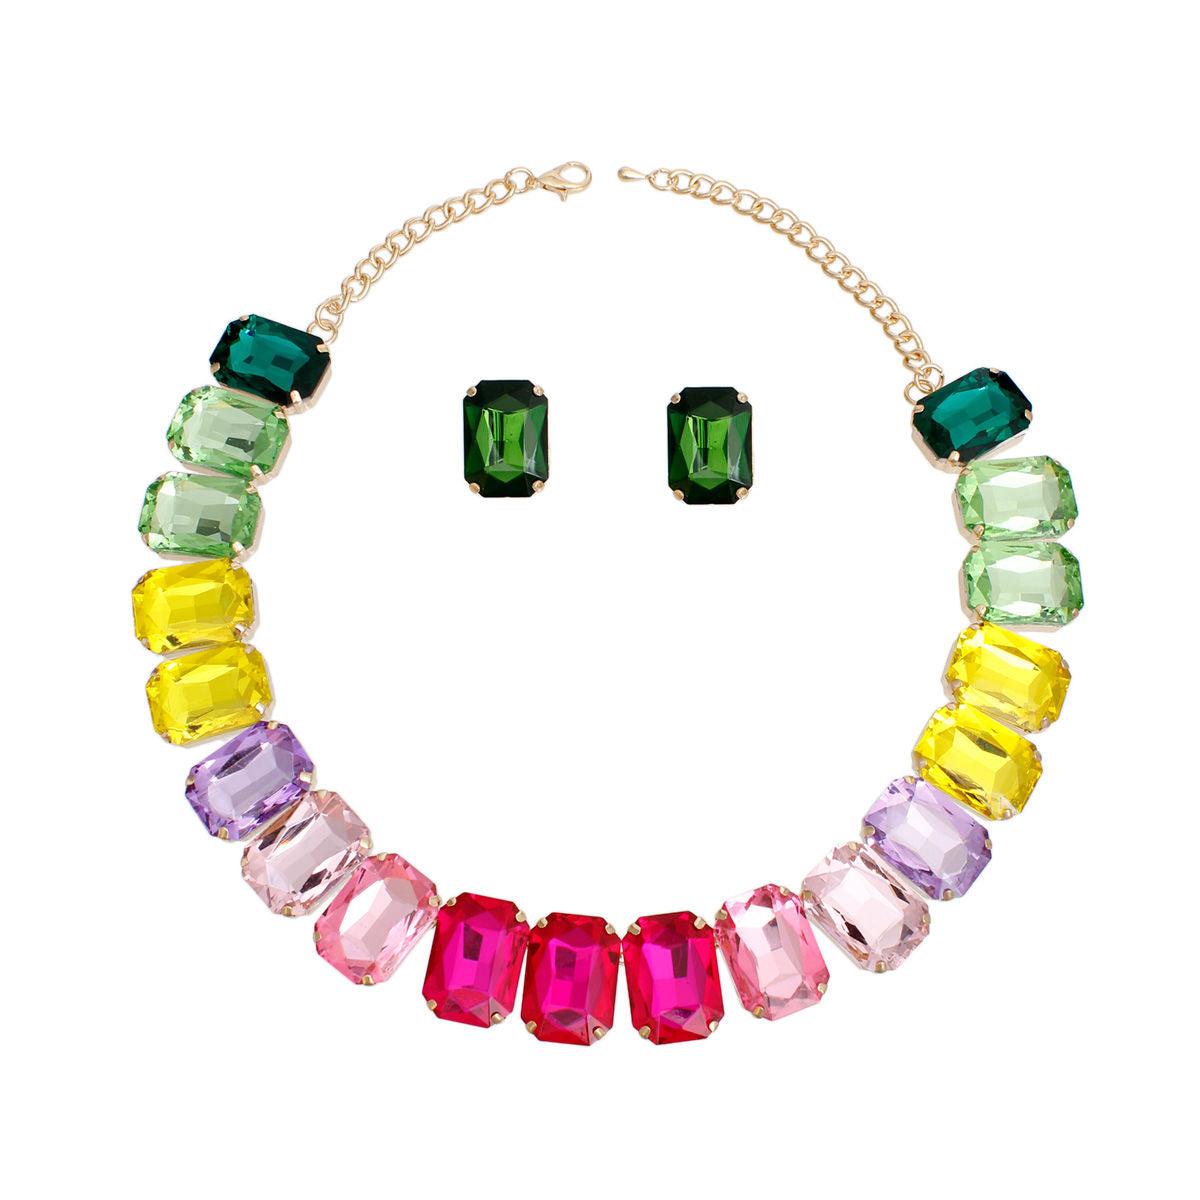 Captivating Multicolor Necklace Set - Define Sophisticated Style